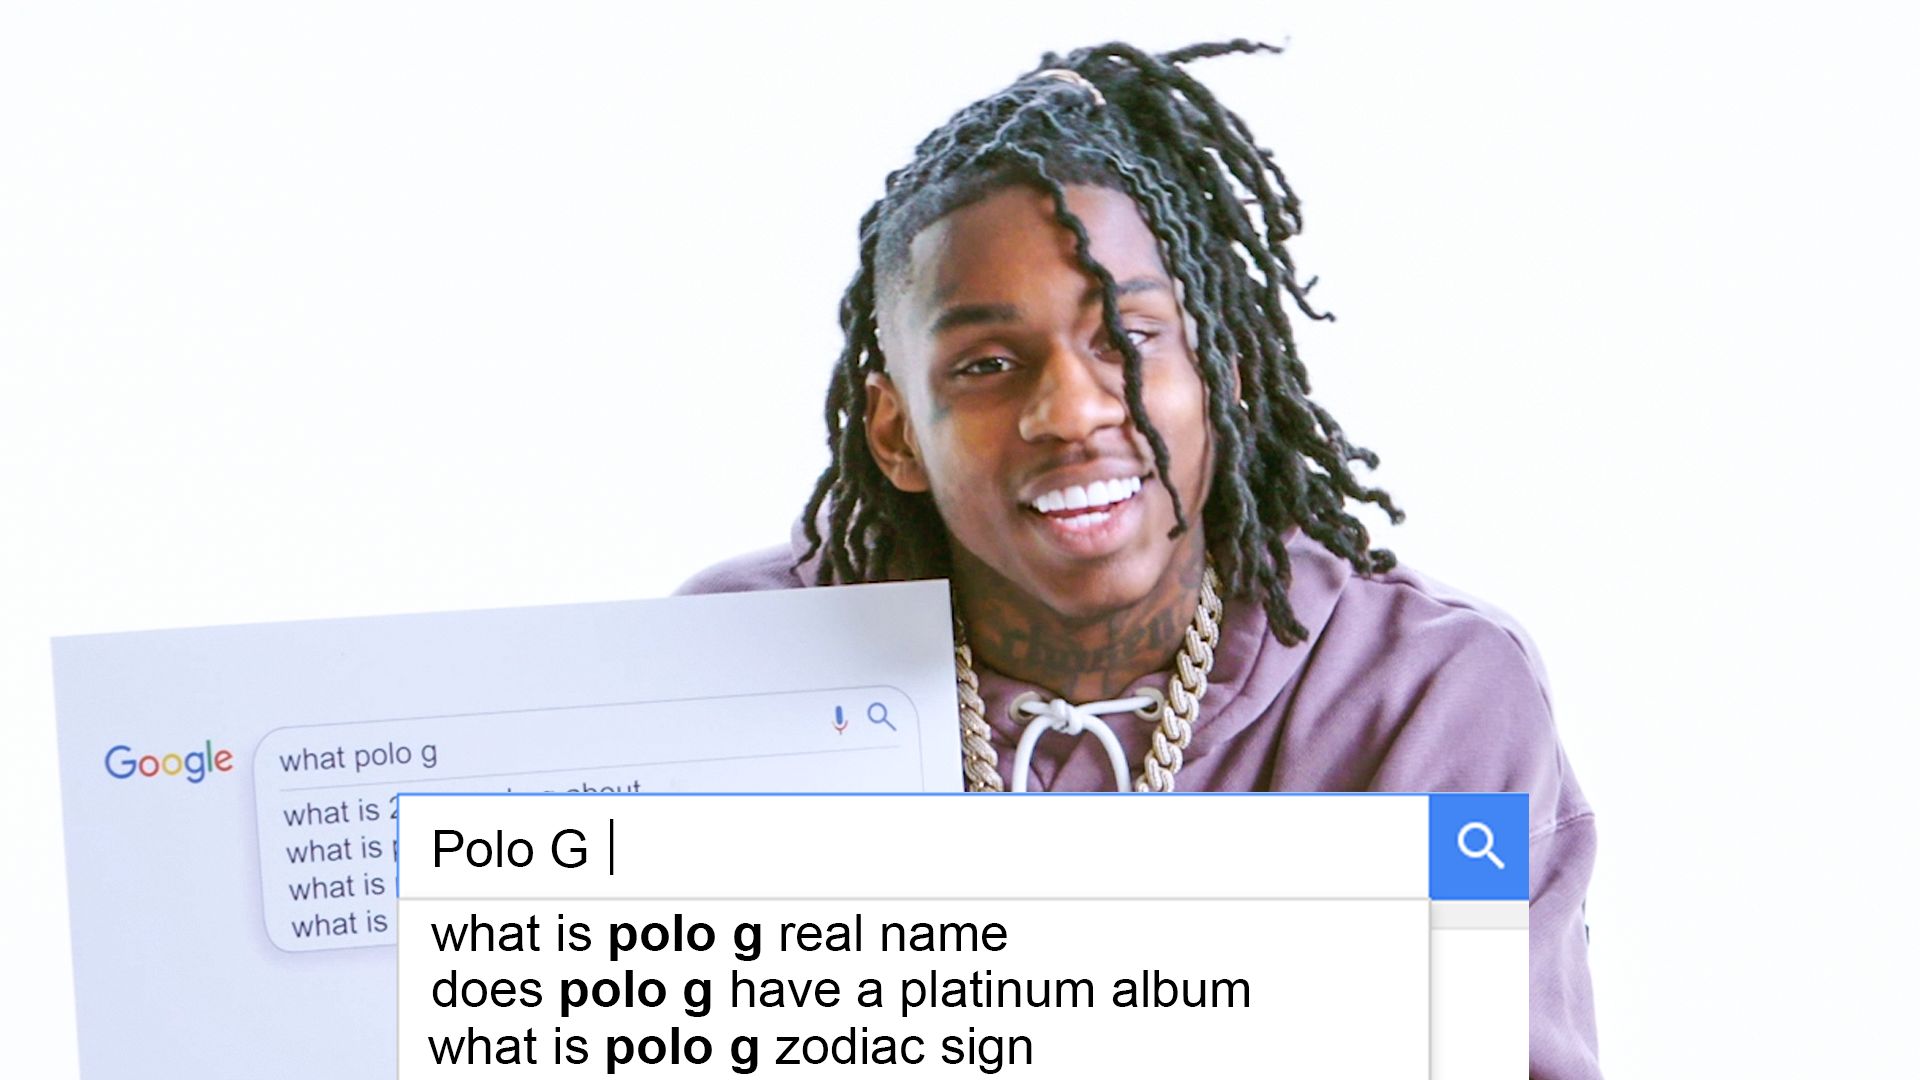 Polo G - Polo G updated his cover photo.